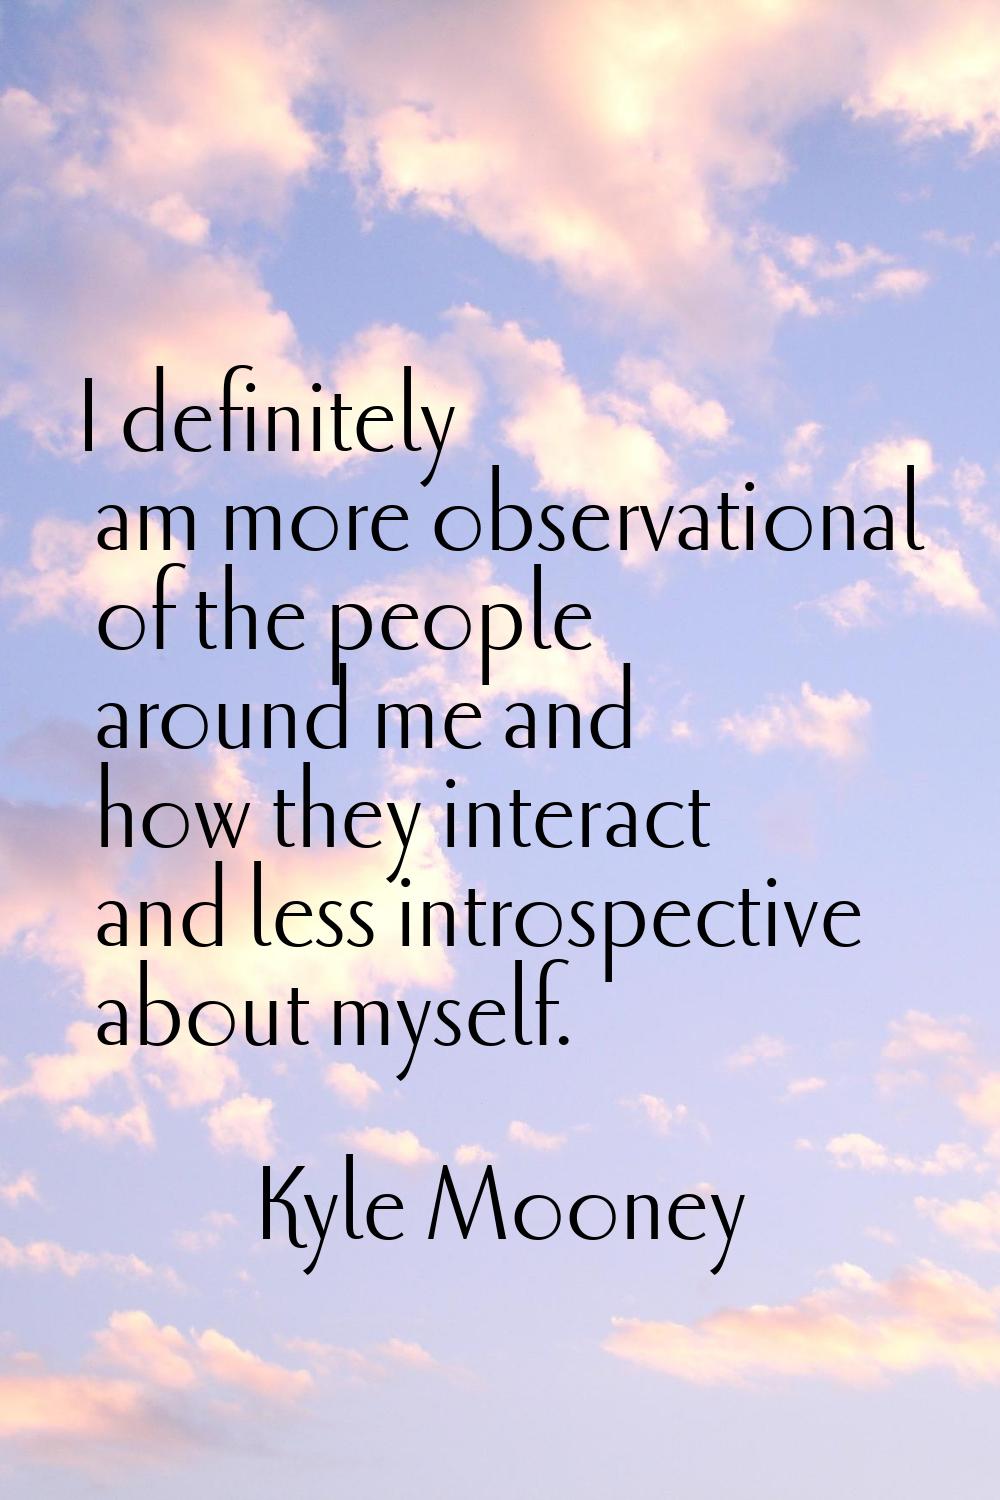 I definitely am more observational of the people around me and how they interact and less introspec